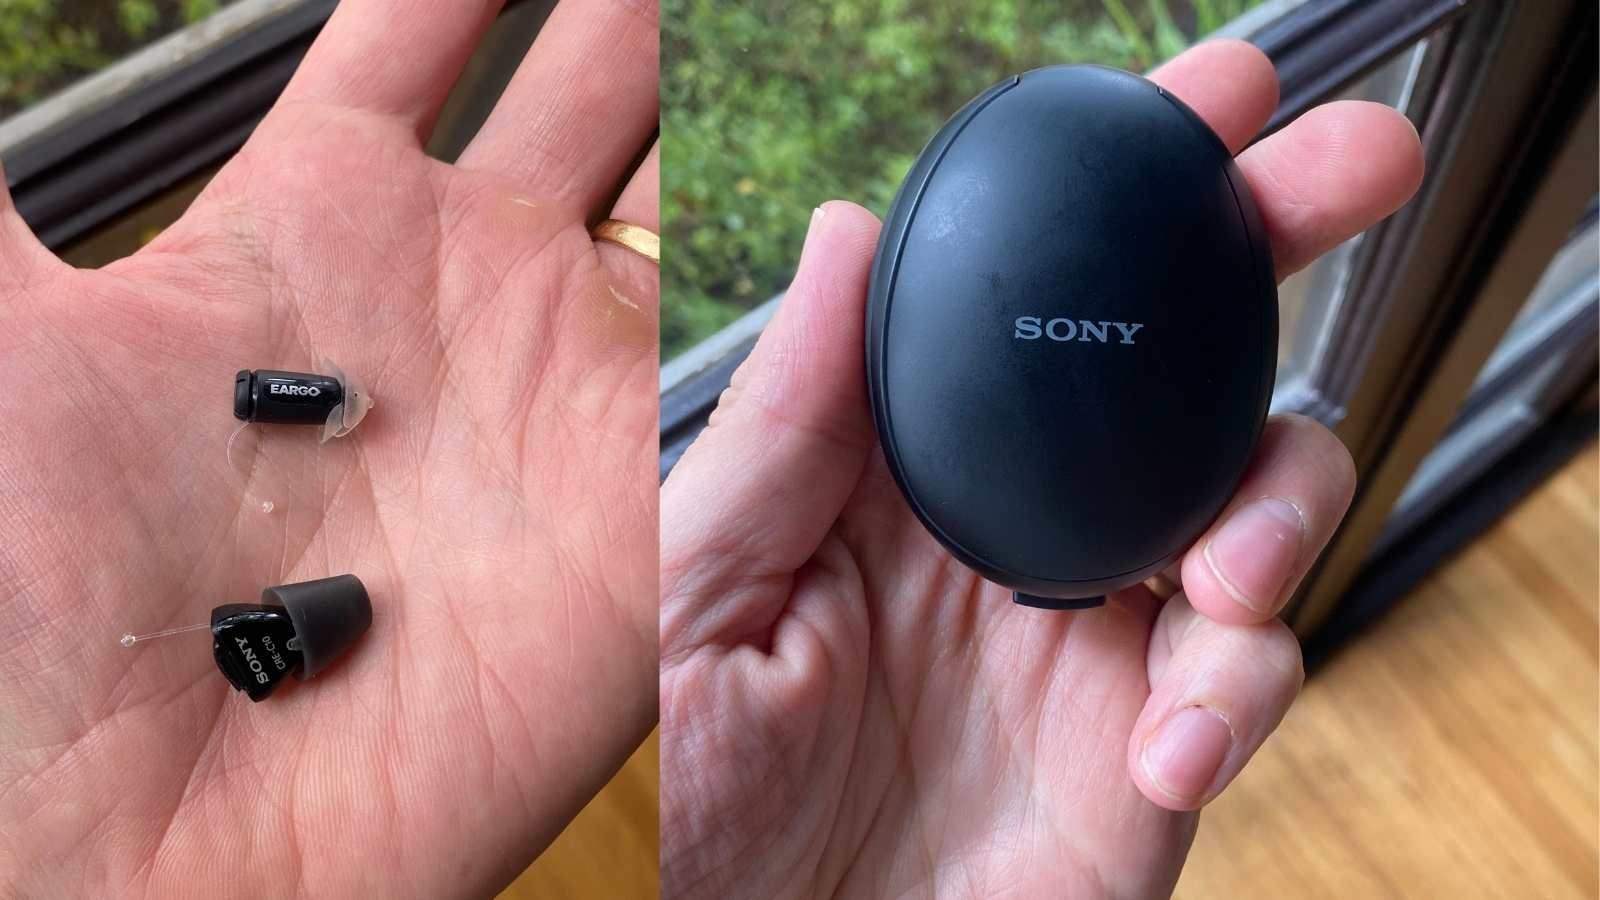 Sony CRE-C10 in hand next to Eargo hearing aid